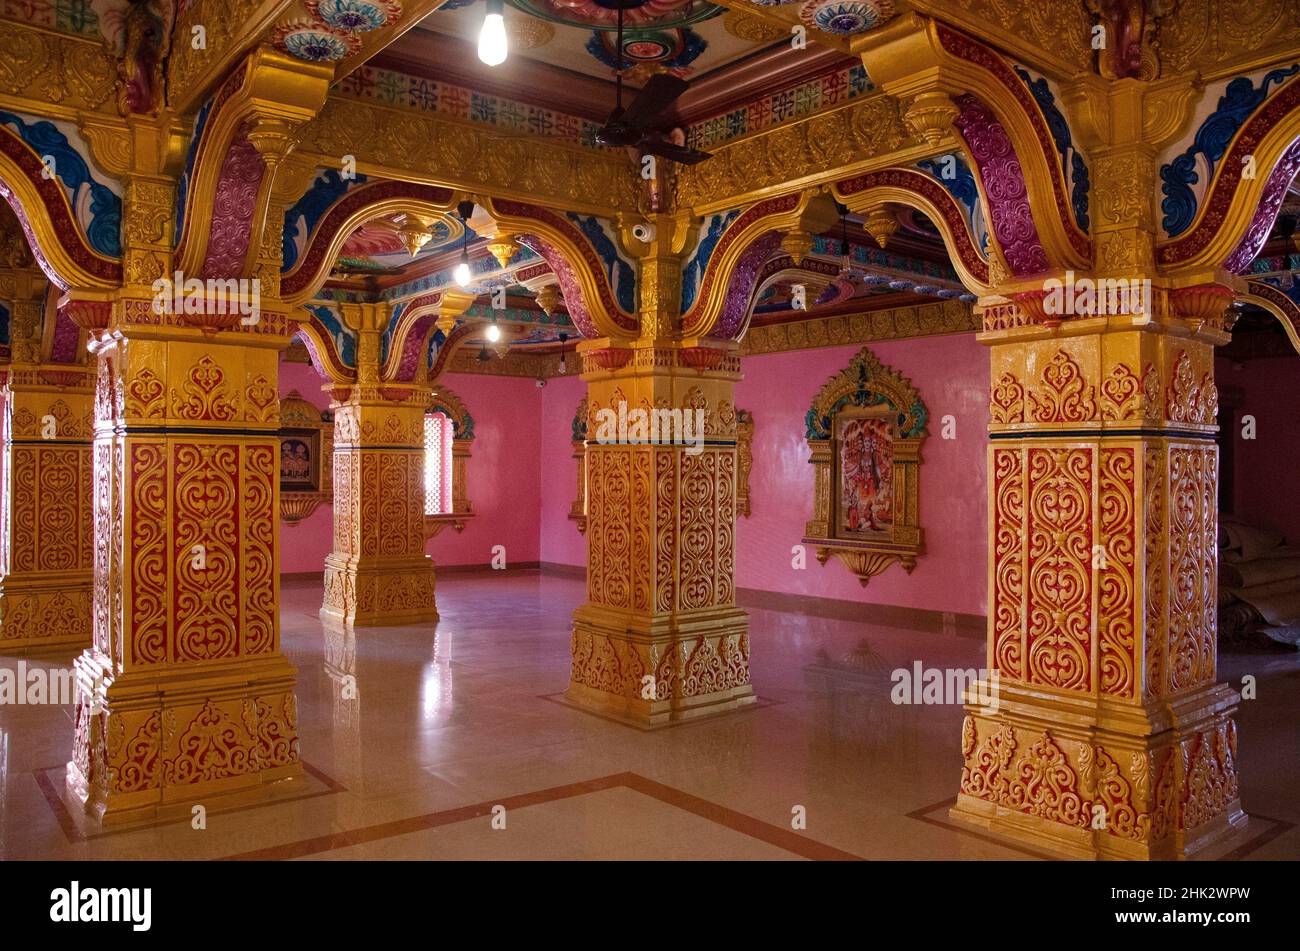 Interior of the temple at Nilkanthdham, Swaminarayan temple an extensive religious complex with pagodas, fountains, statues & carved idols and gates, Stock Photo